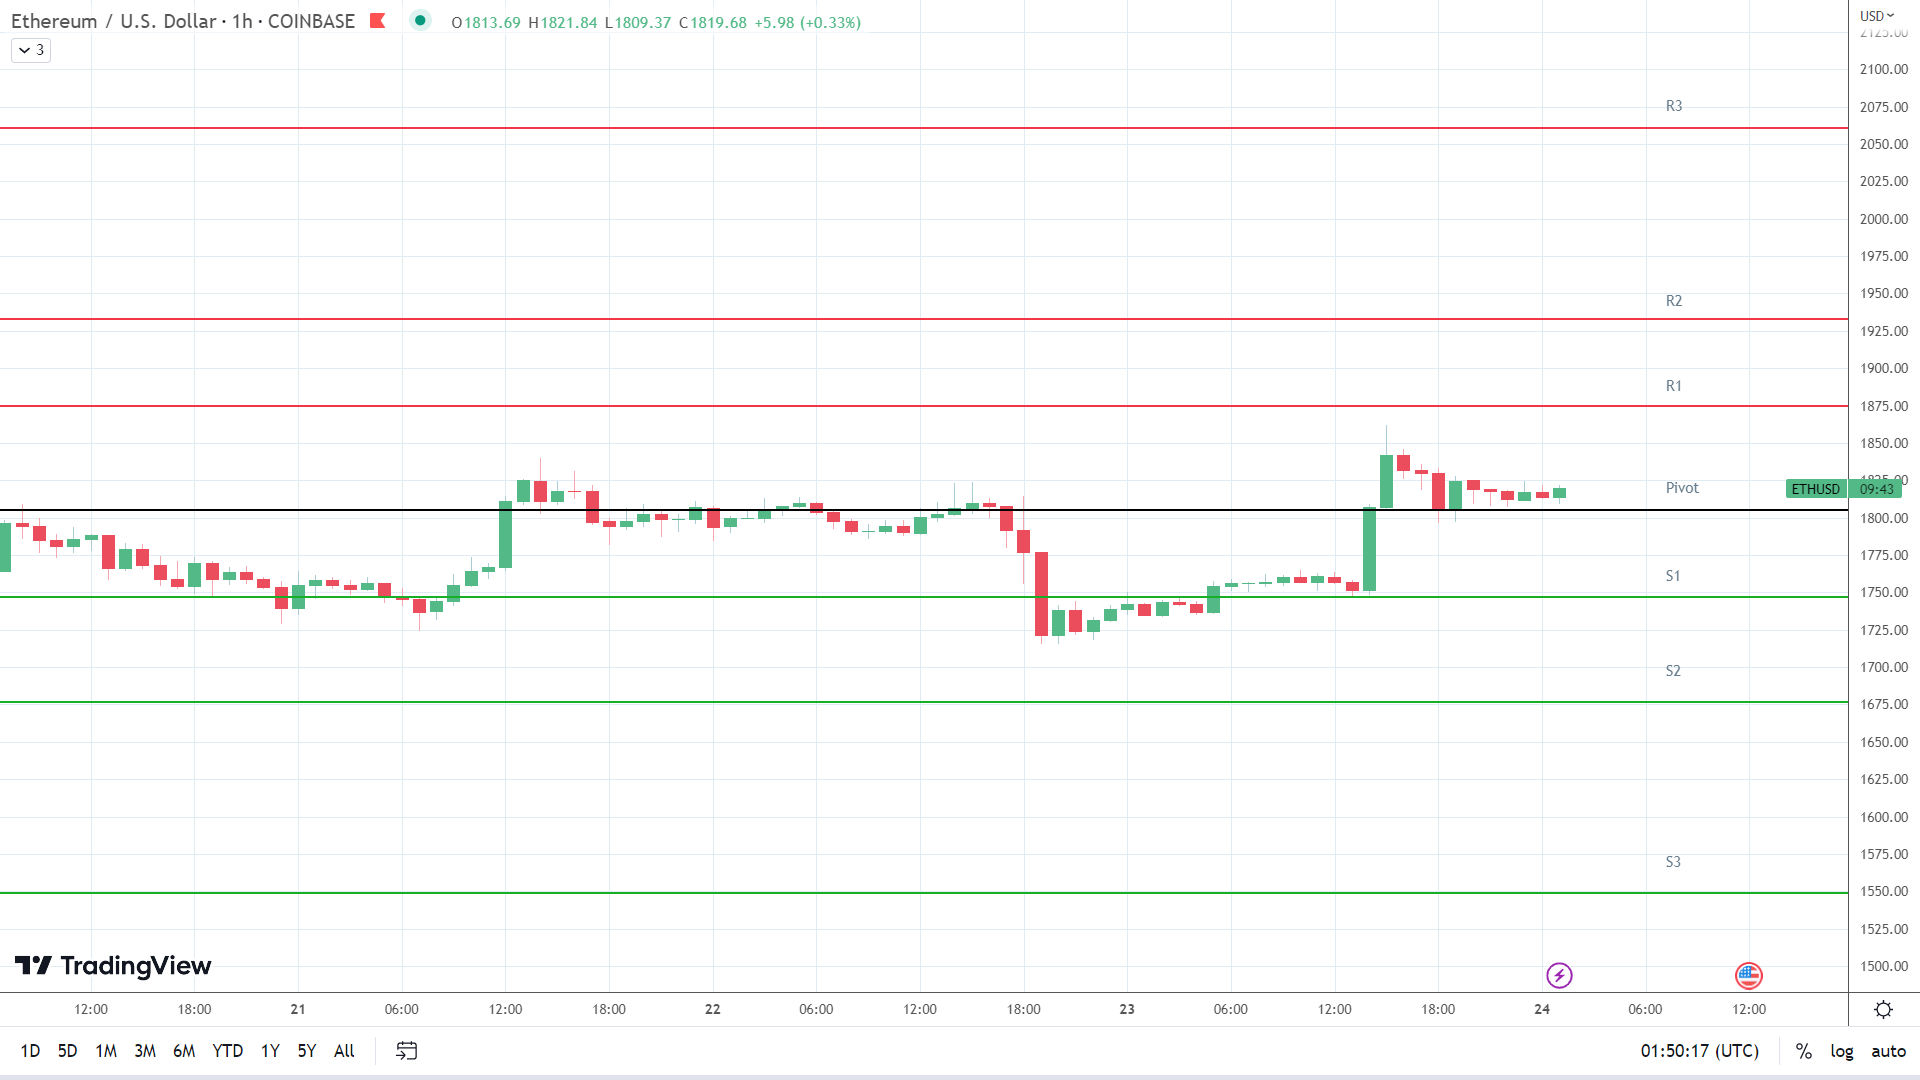 ETH resistance levels in play above the pivot.